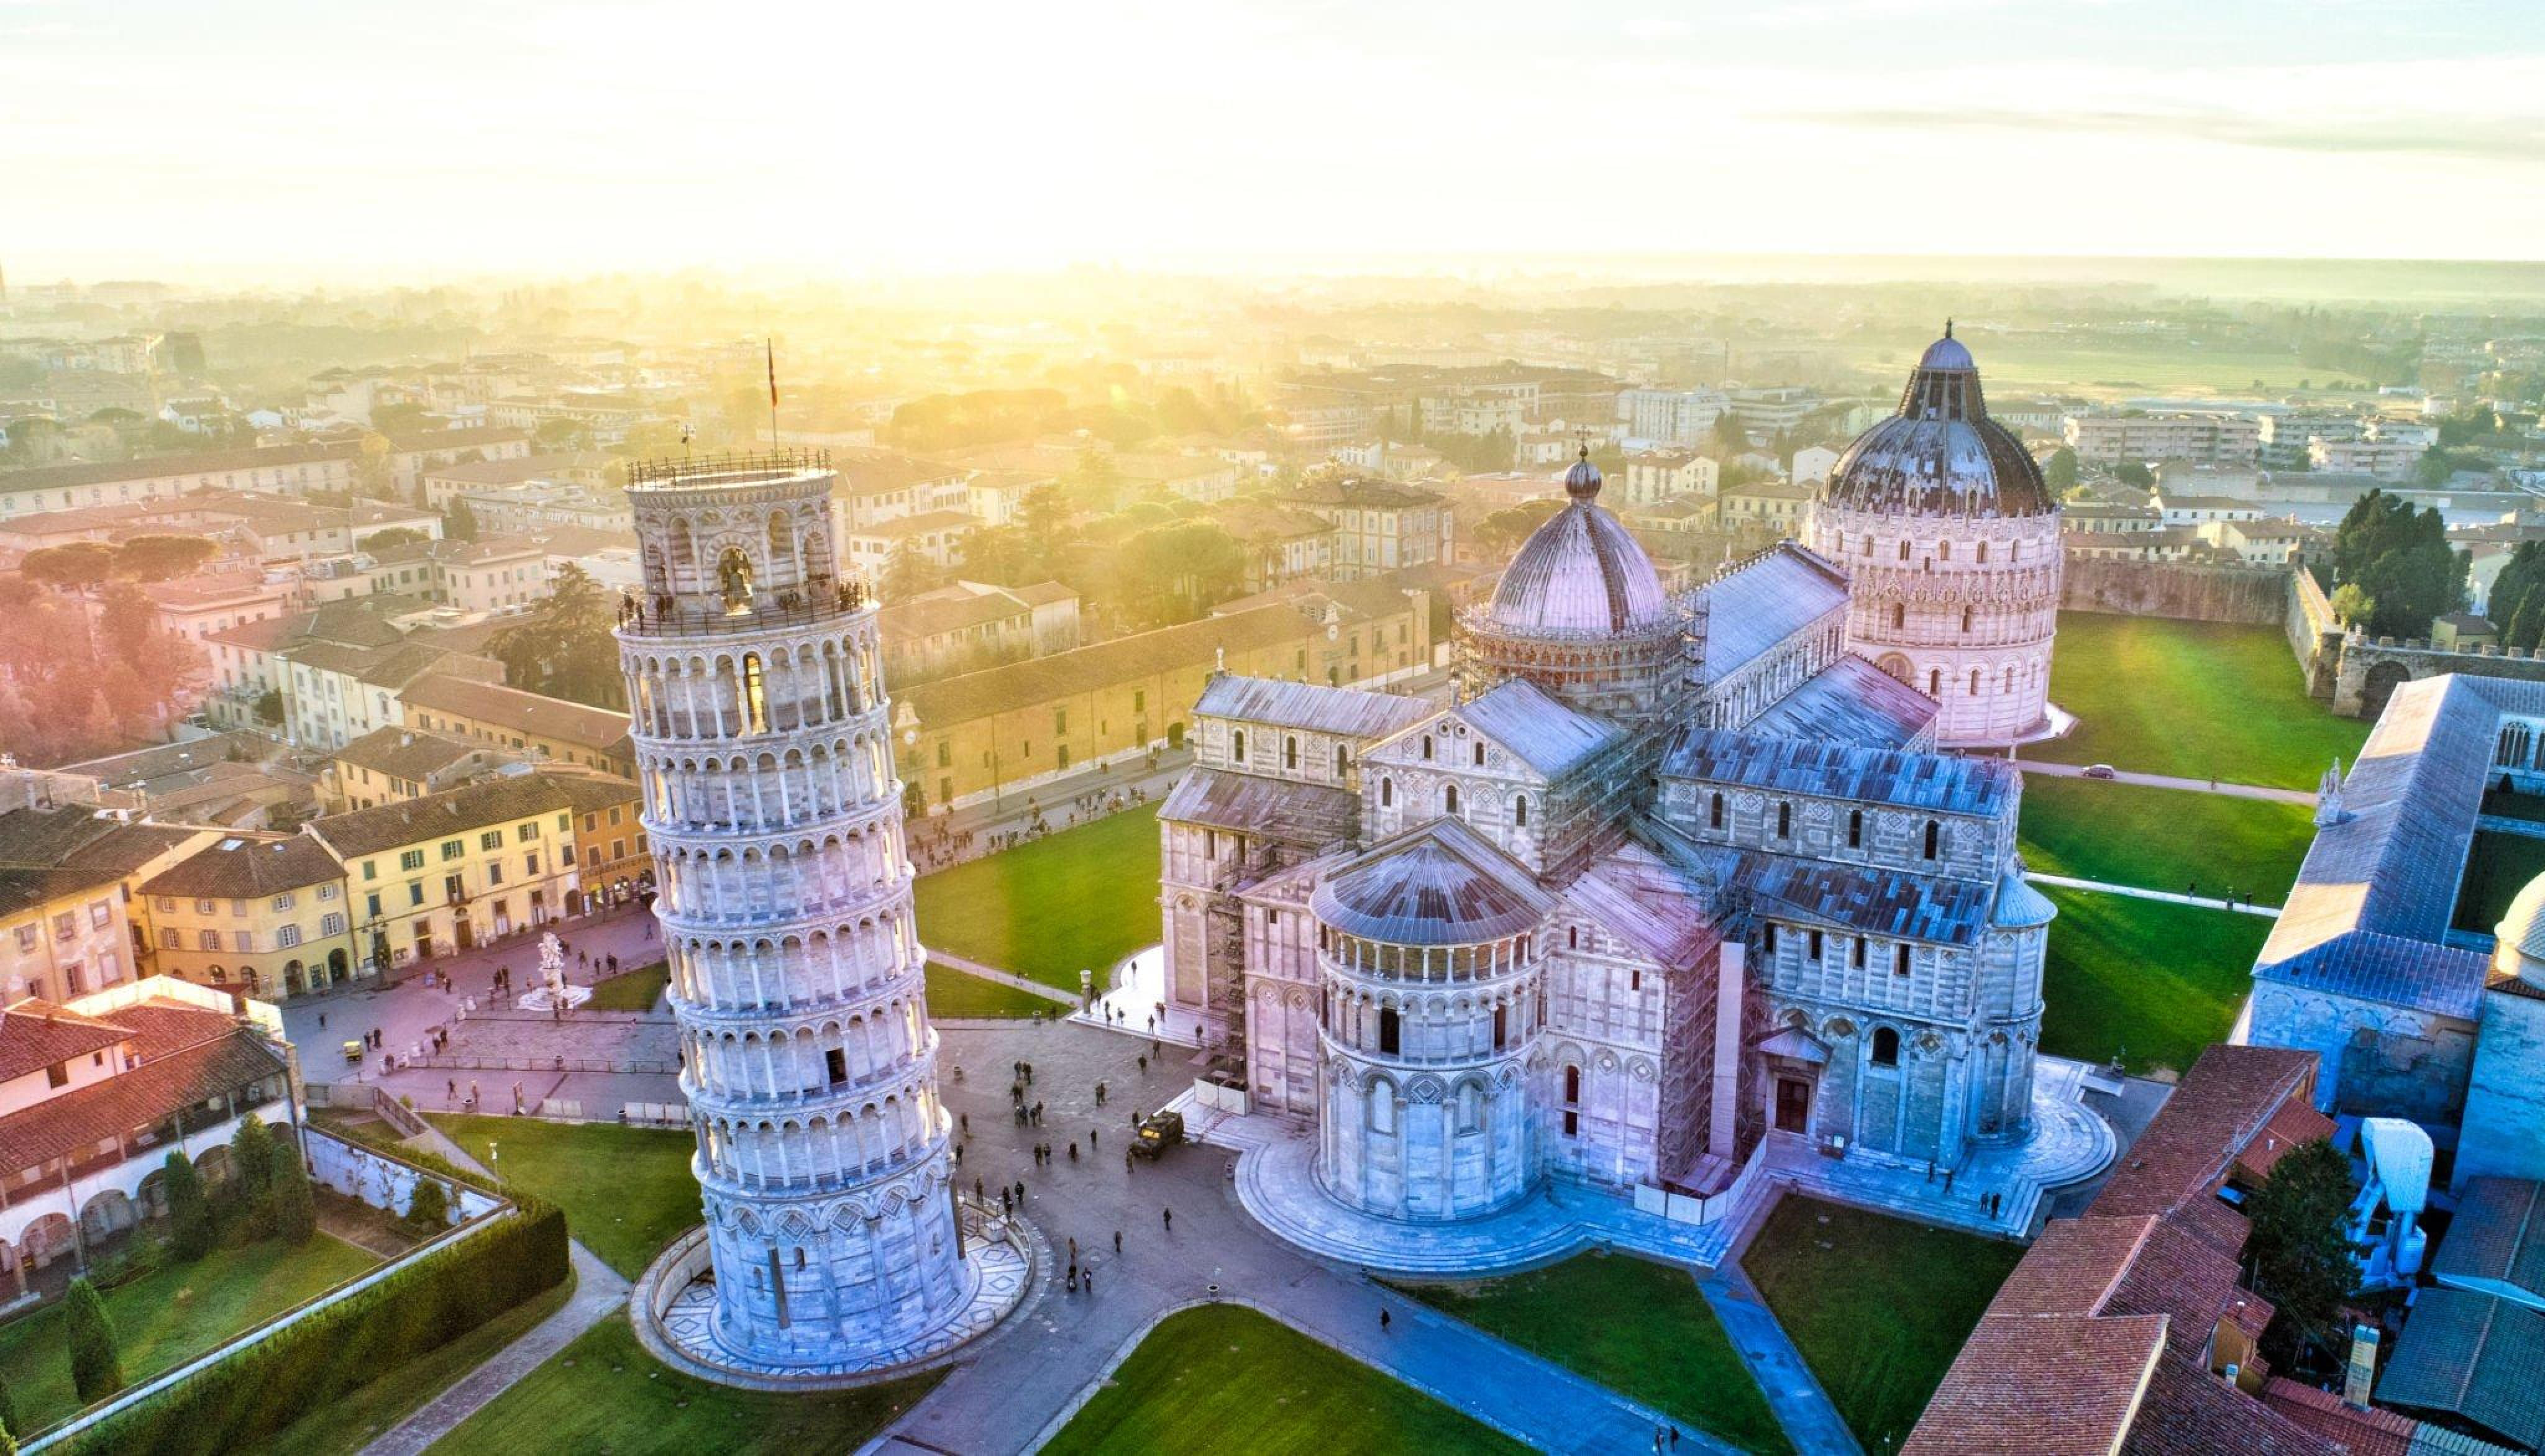 Leaning Tower Of Pisa view